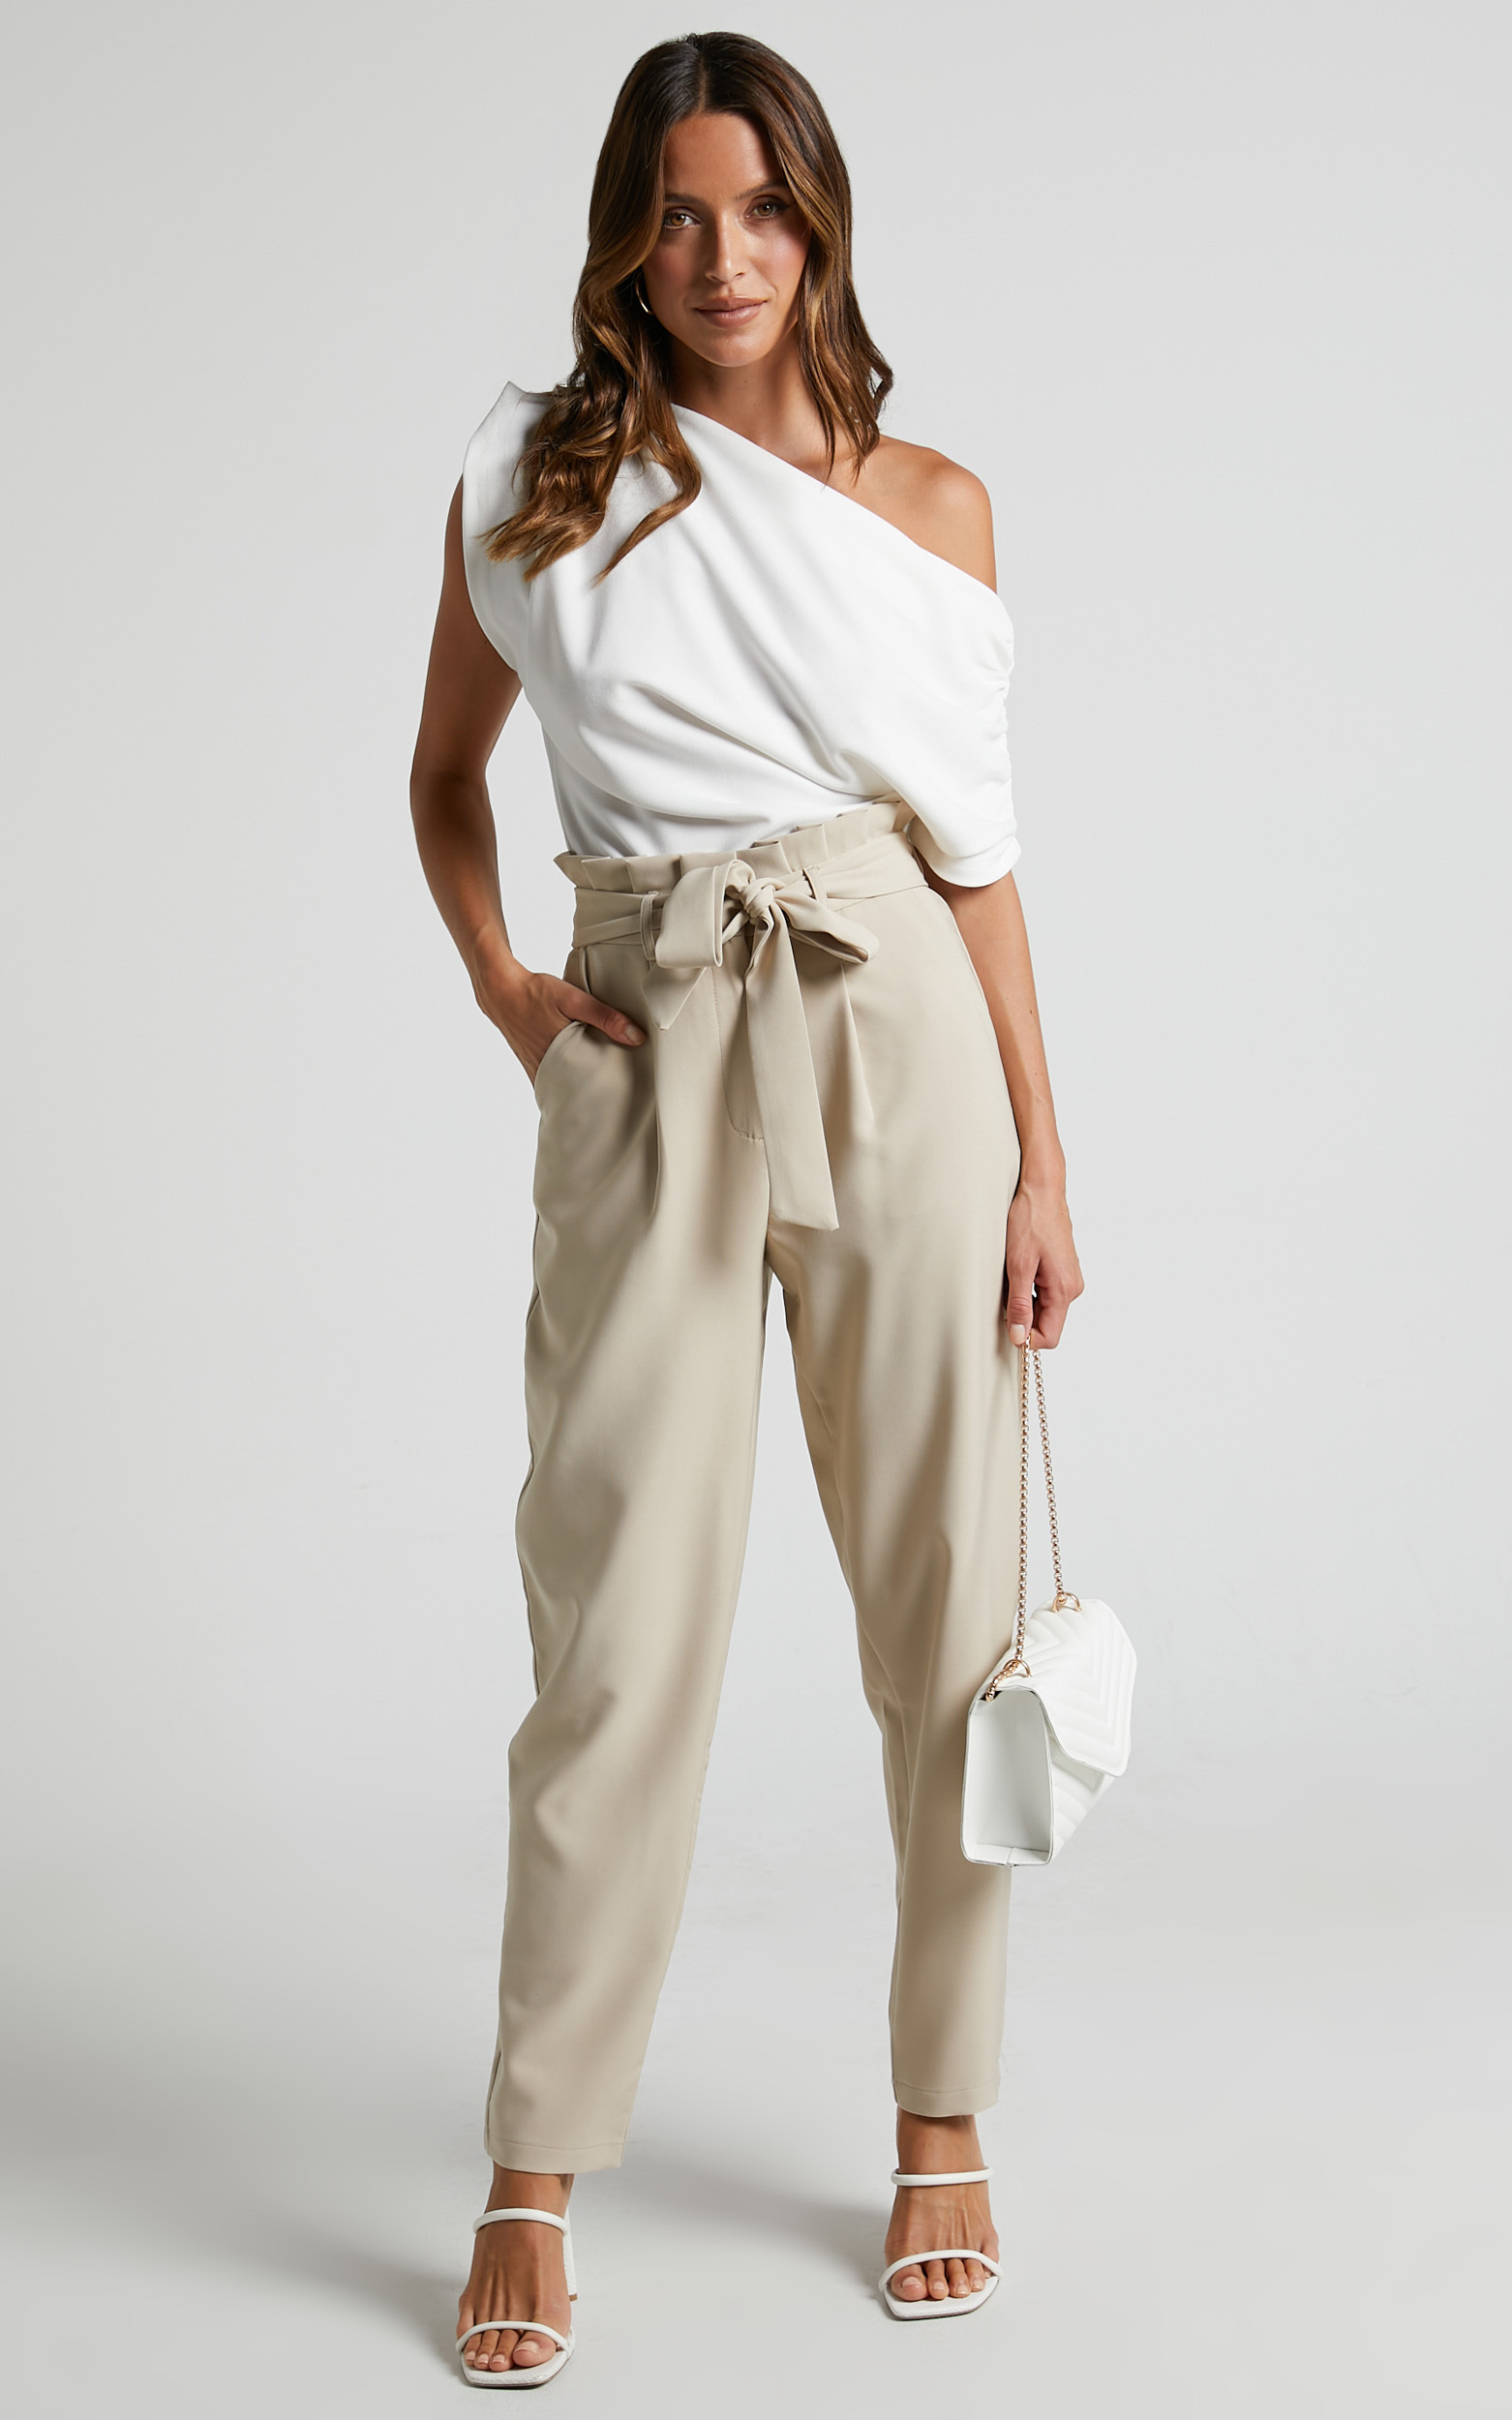 Annalise - High Waisted Paper Bag Waist Pants in Stone - 06, NEU1, hi-res image number null